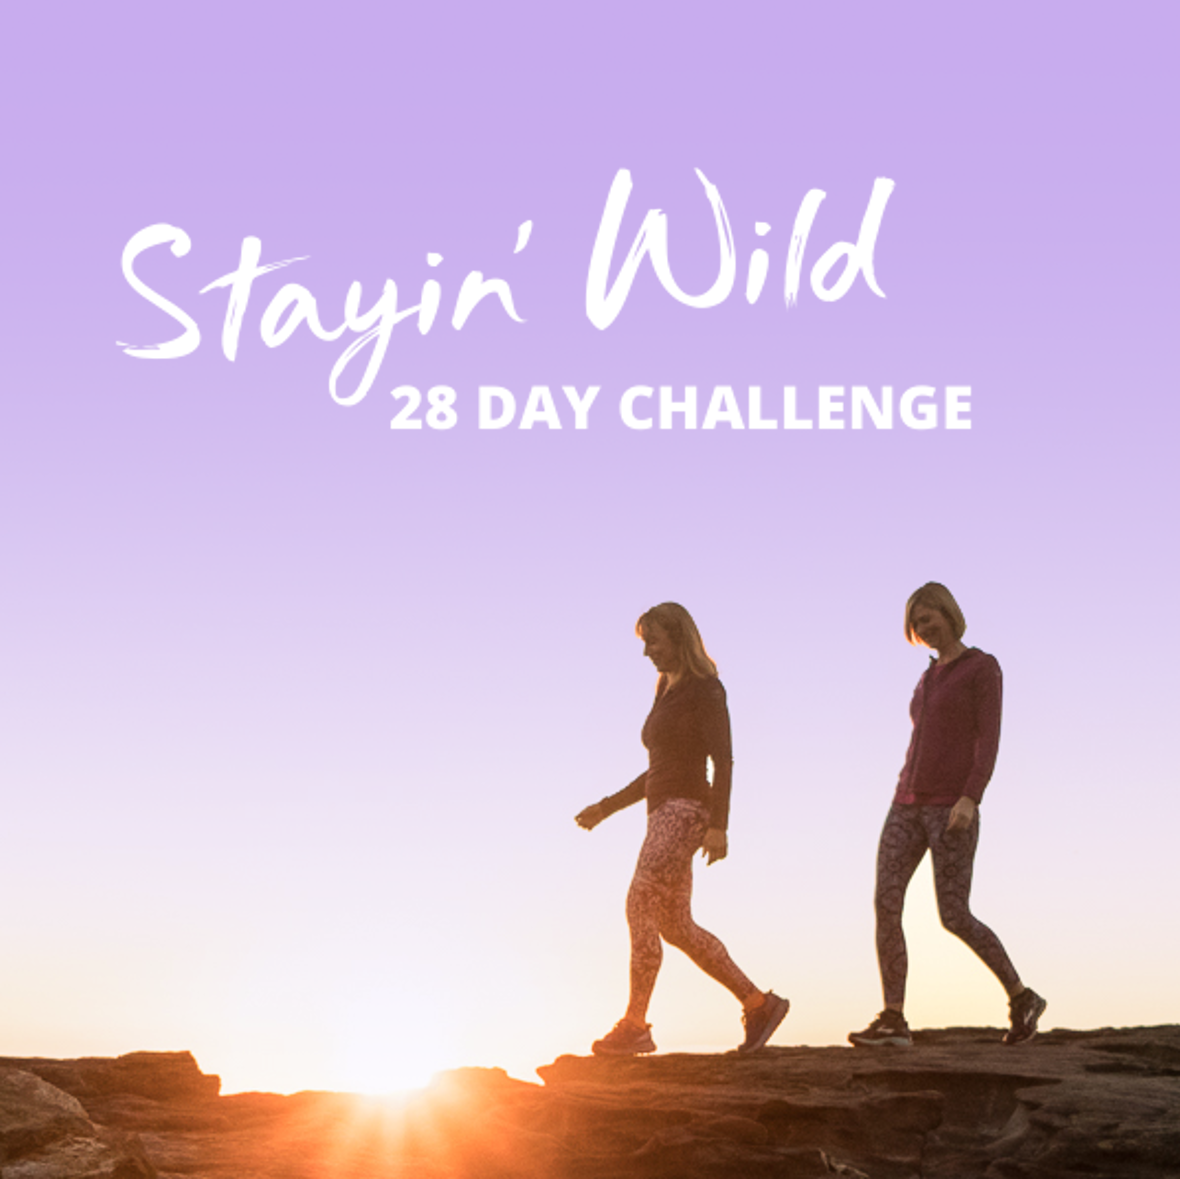 Join Stayin’ Wild’s 28 Day Challenge!